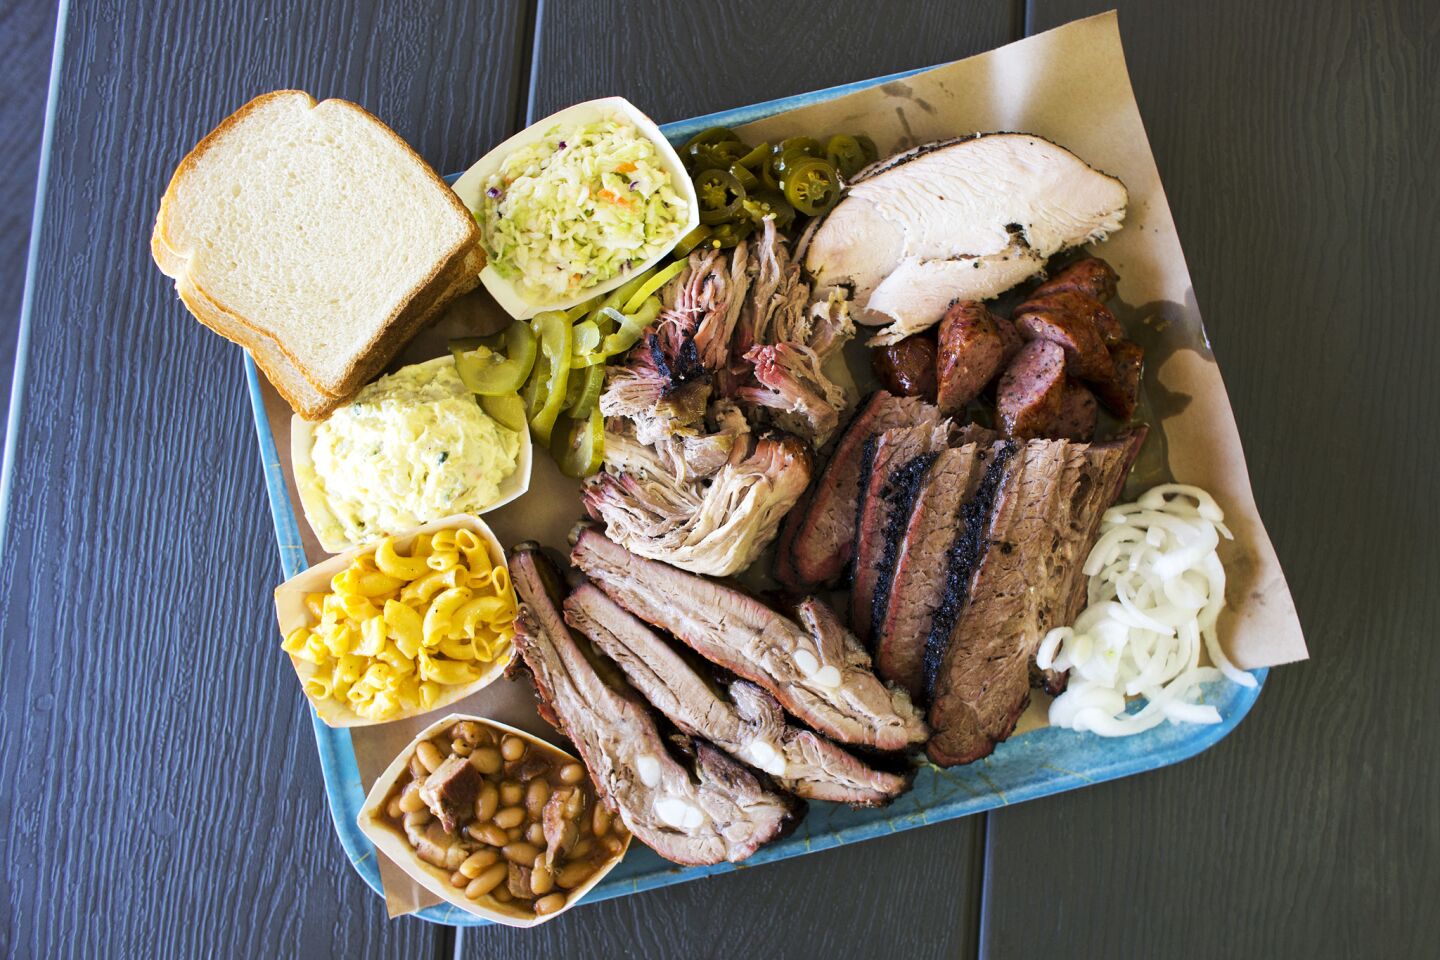 Latino BBQ joints in L.A.